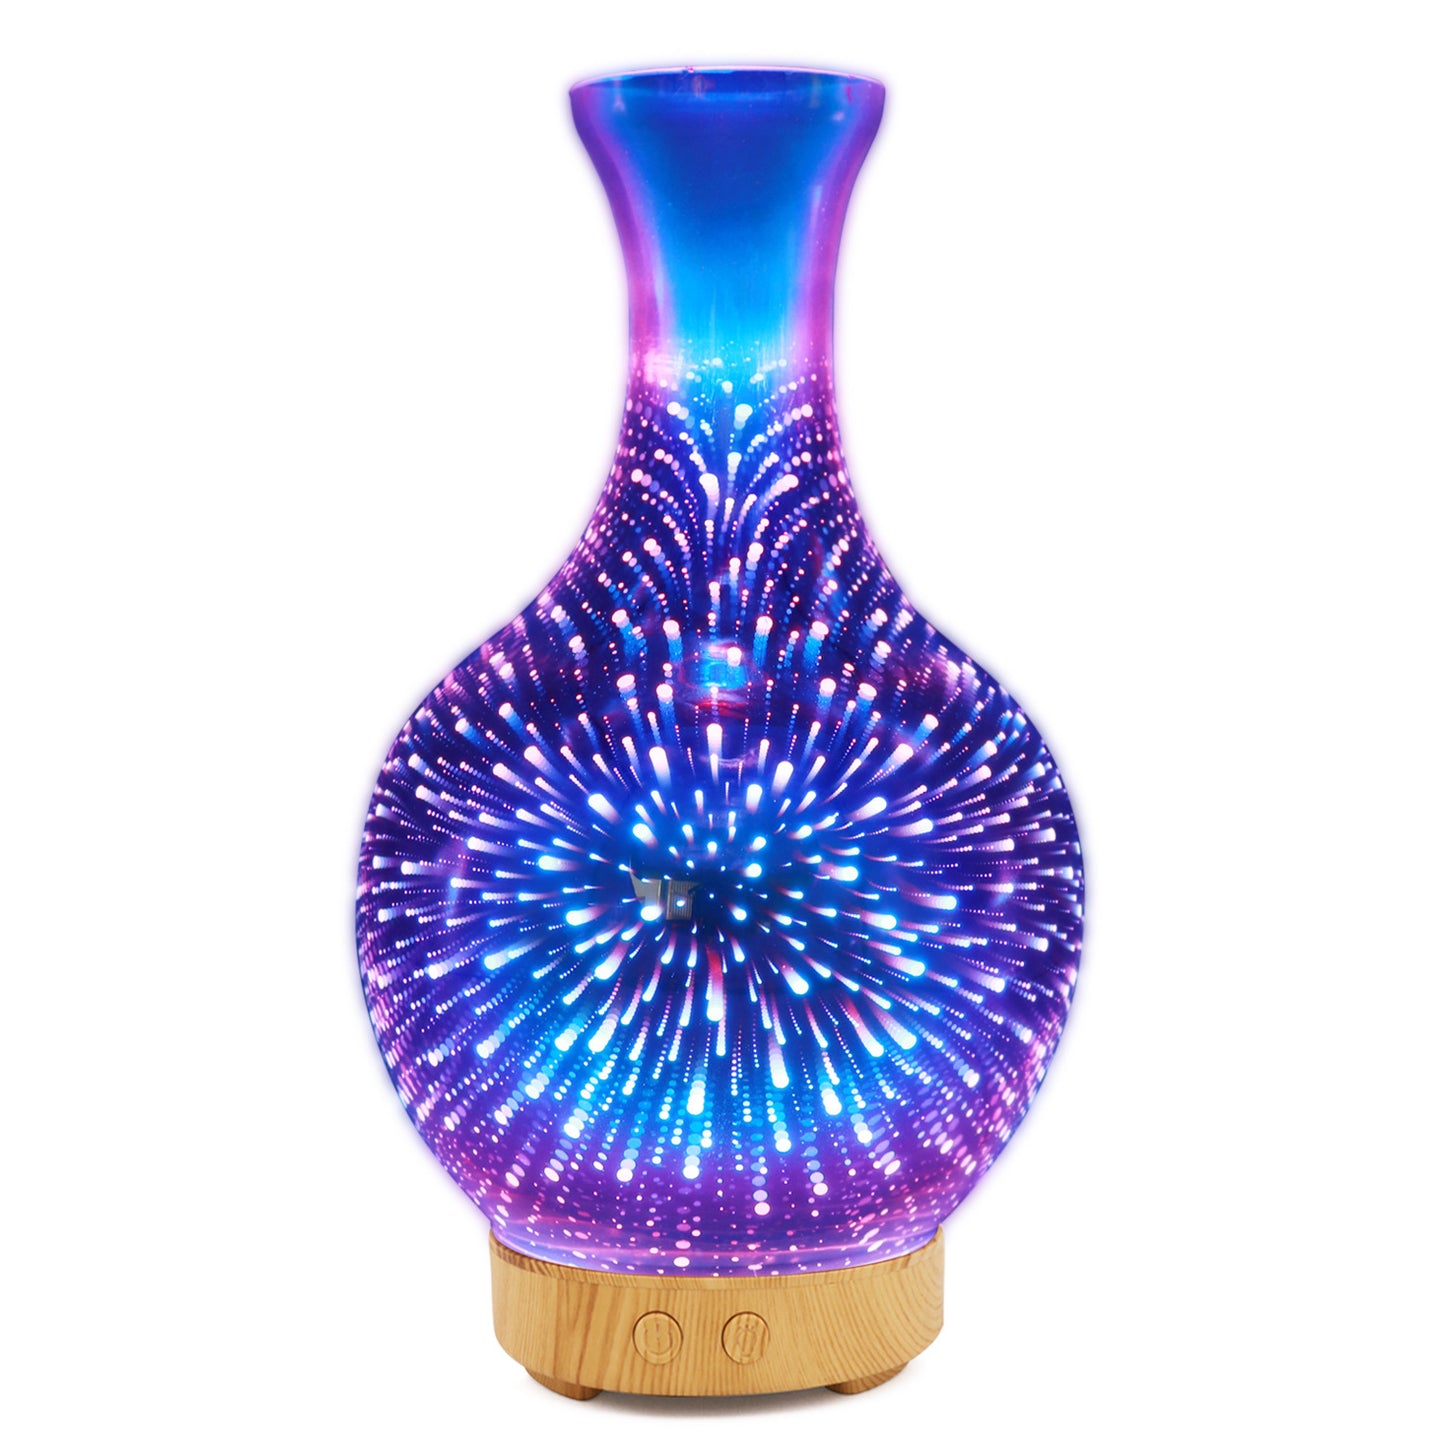 3D glass luminous humidifier dazzling color ultrasonic aromatherapy machine household gift aromatherapy diffuser